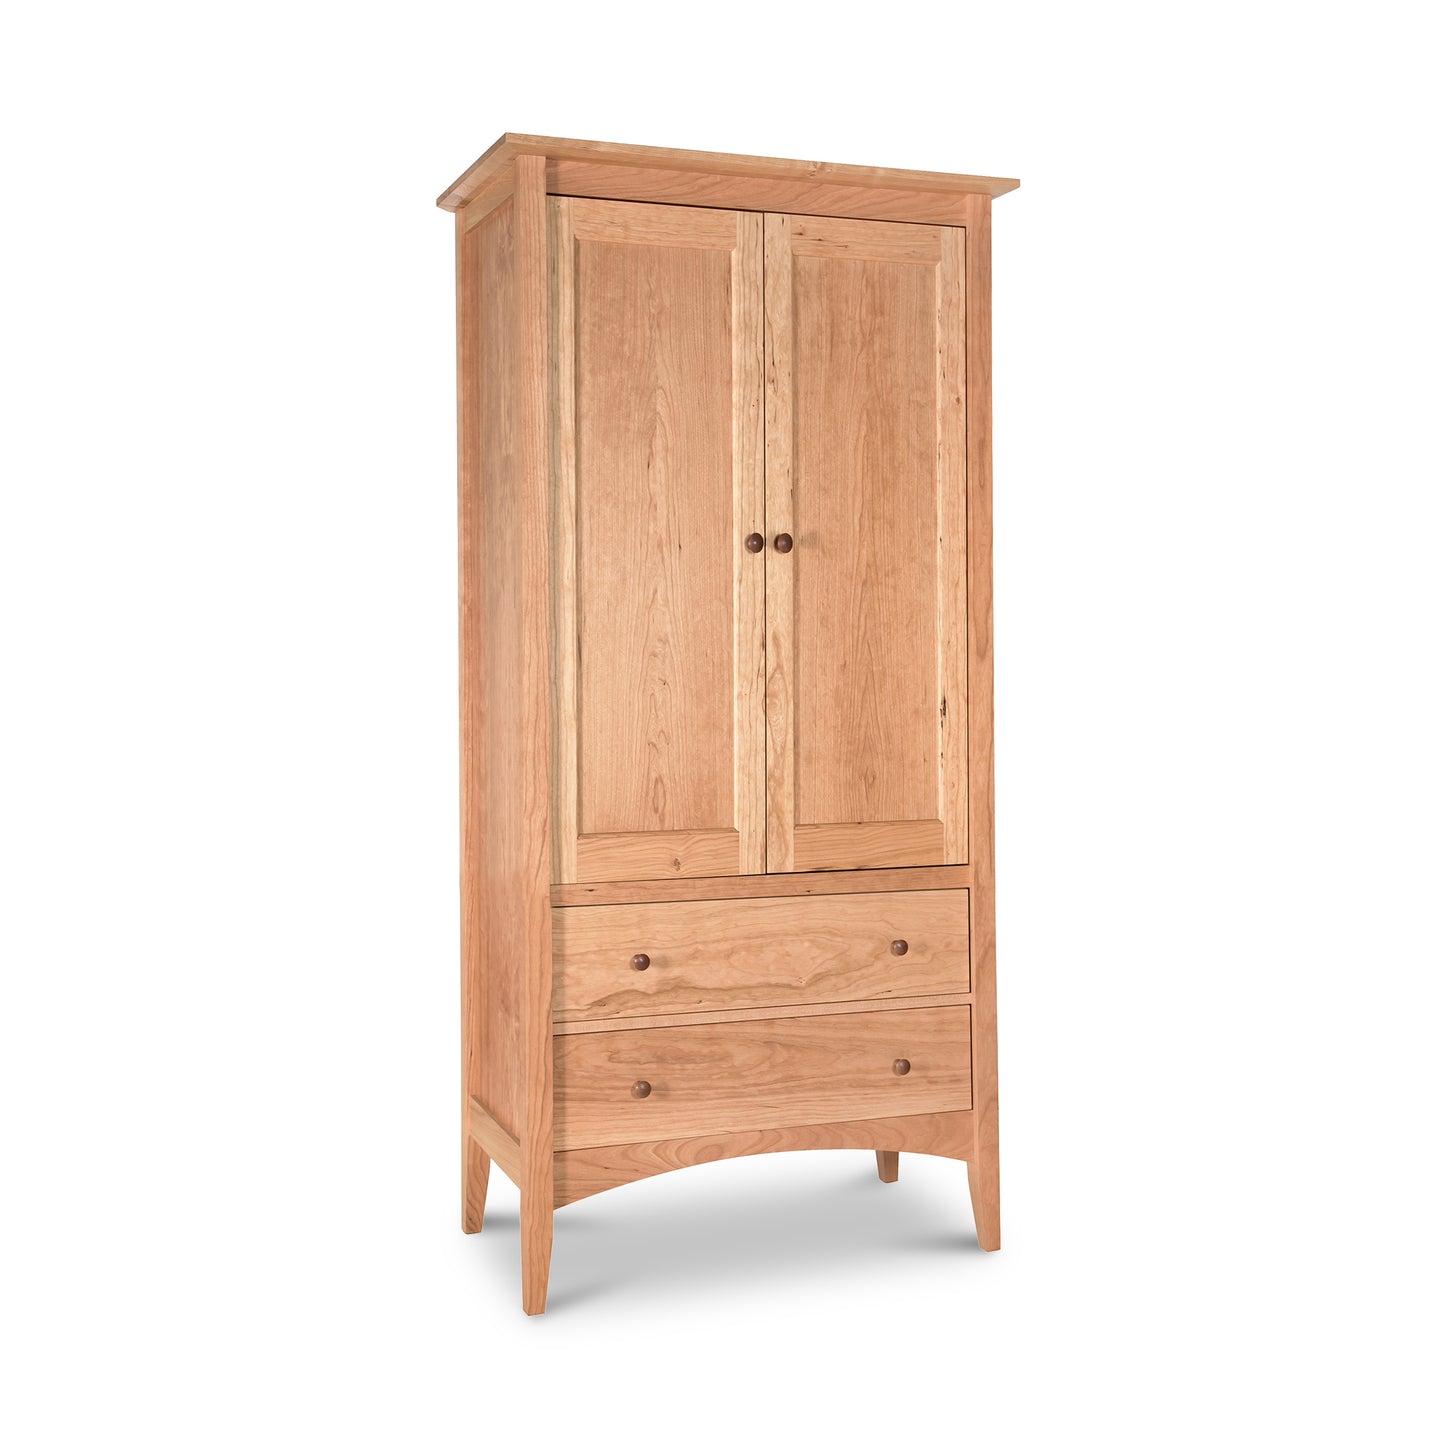 American Shaker Armoire by Maple Corner Woodworks with two doors and a lower drawer, isolated on a white background.